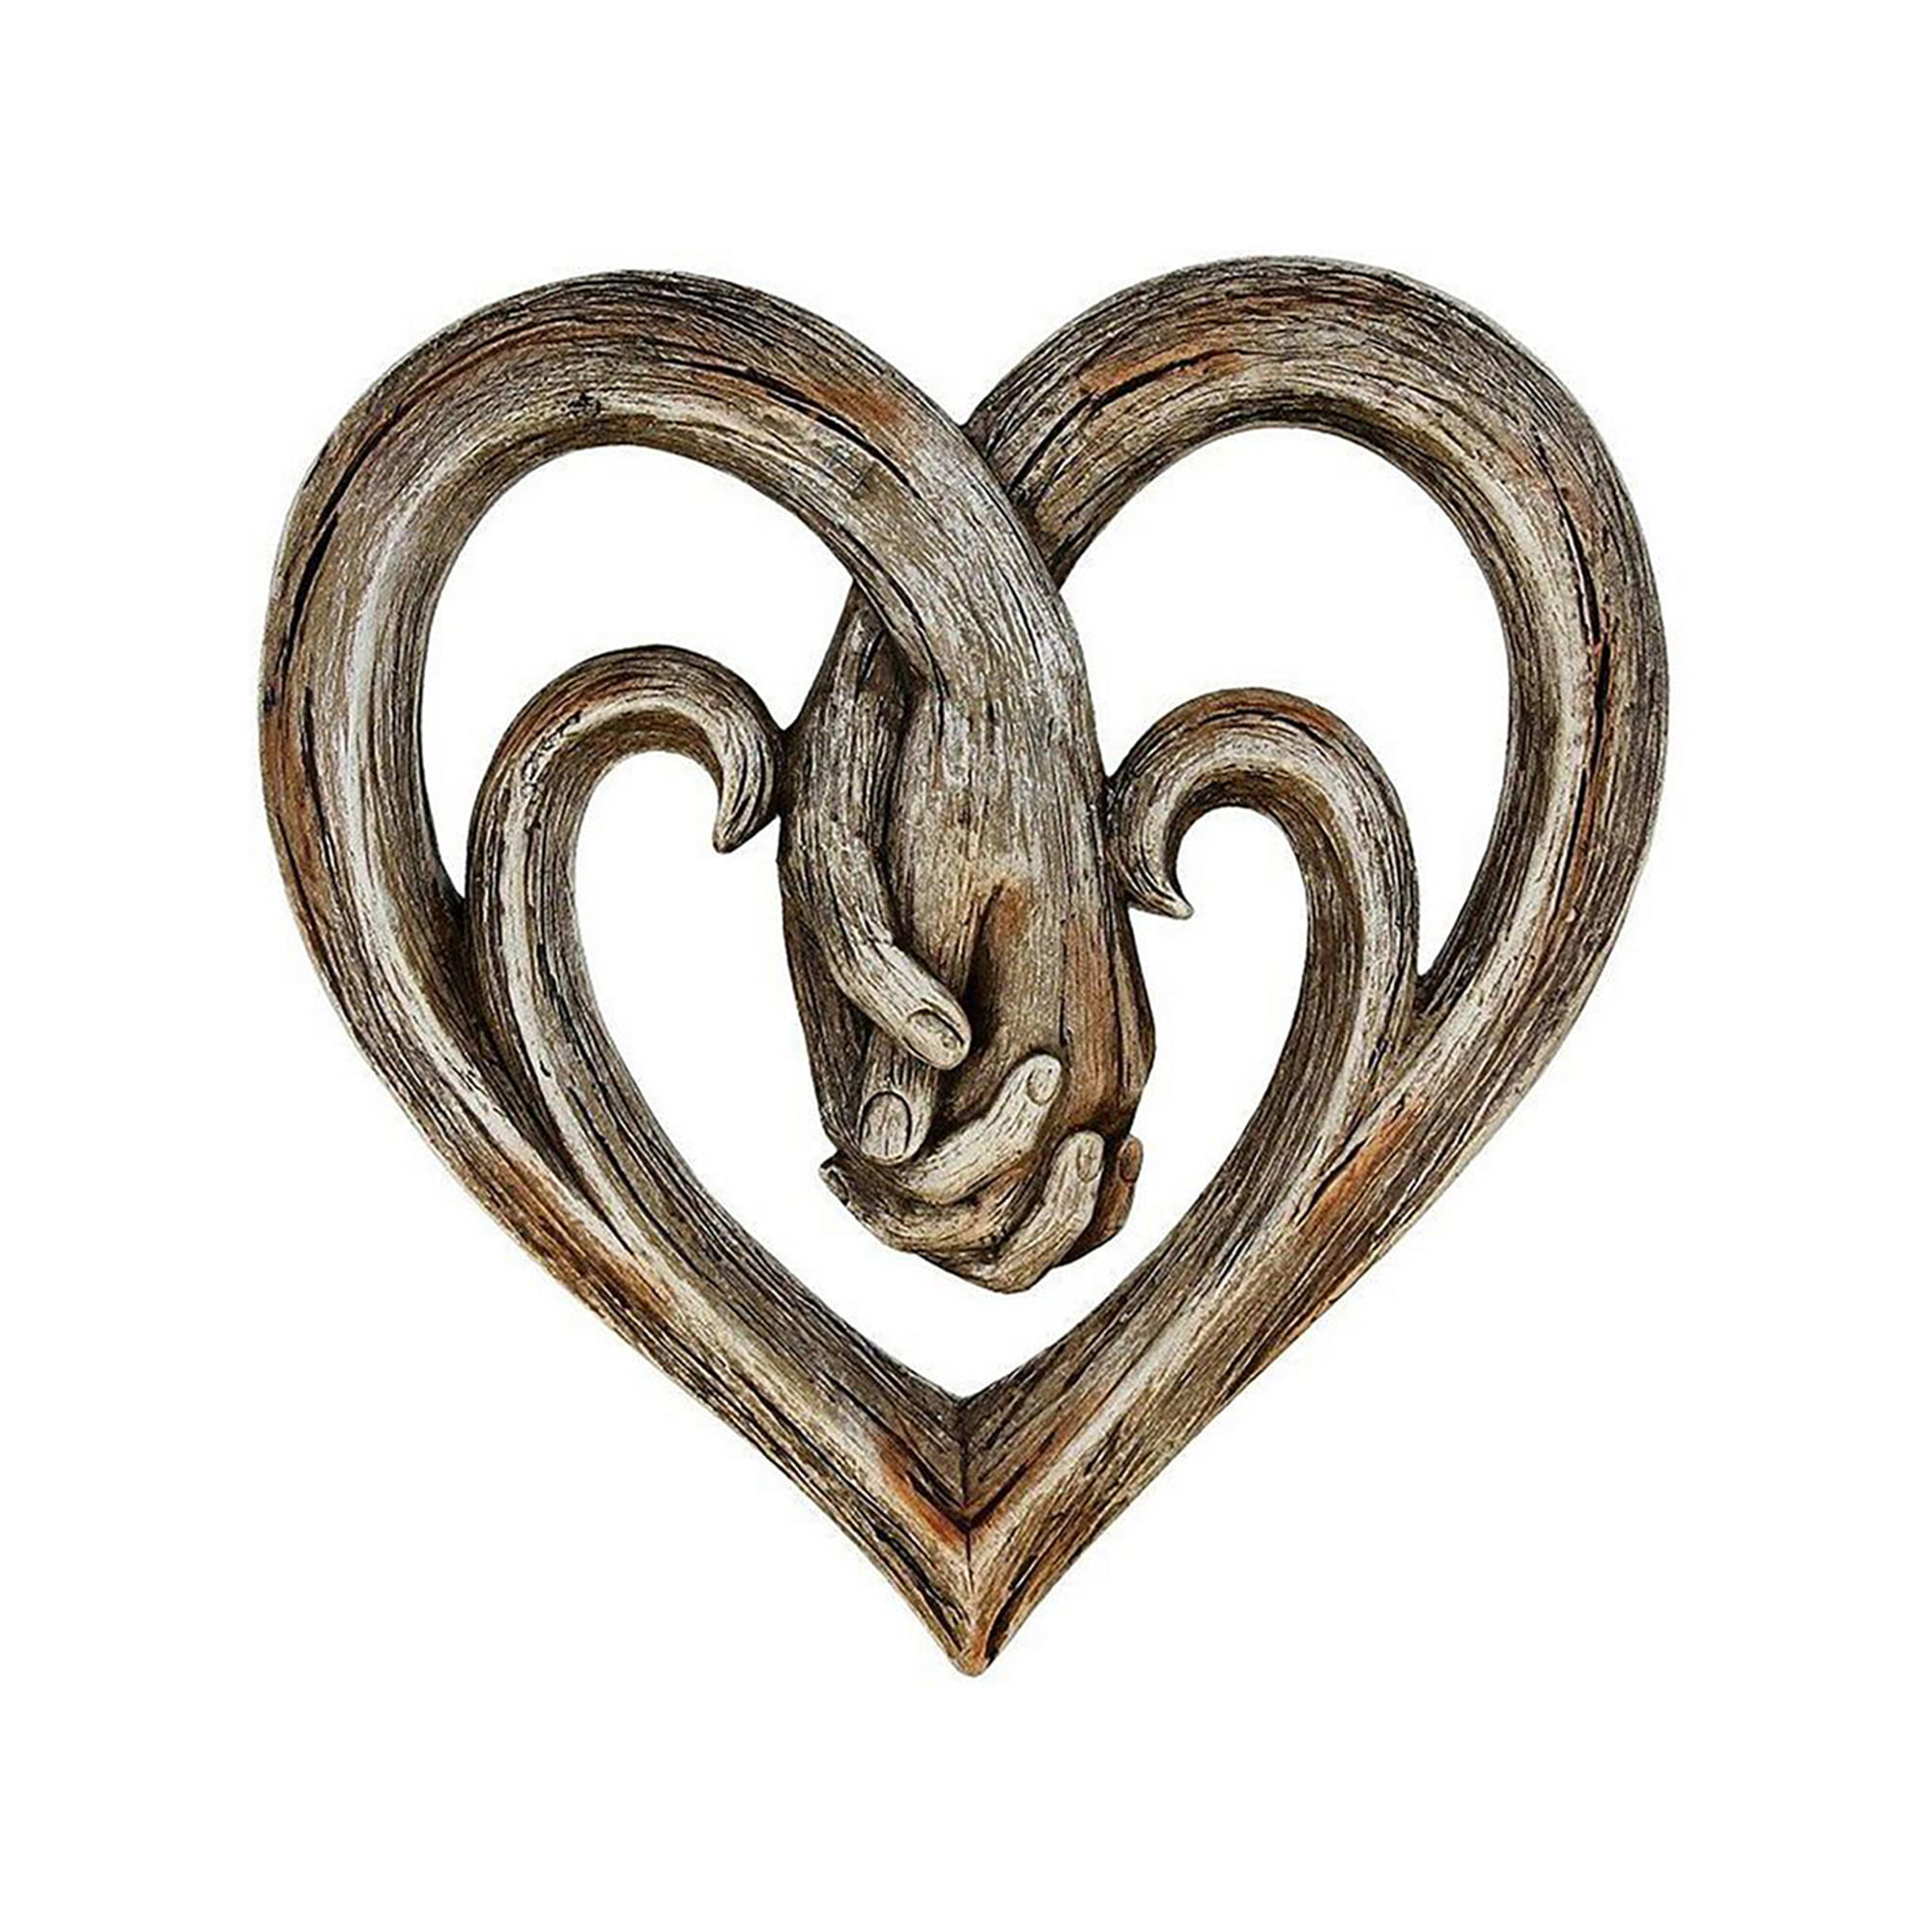 Heart Holding Hands Wall Decor Unique Art Sculpture Ornaments Metal Entwined Hearts Ornaments Perfect Love Statue For Garden Patio Living Room Bedroom 